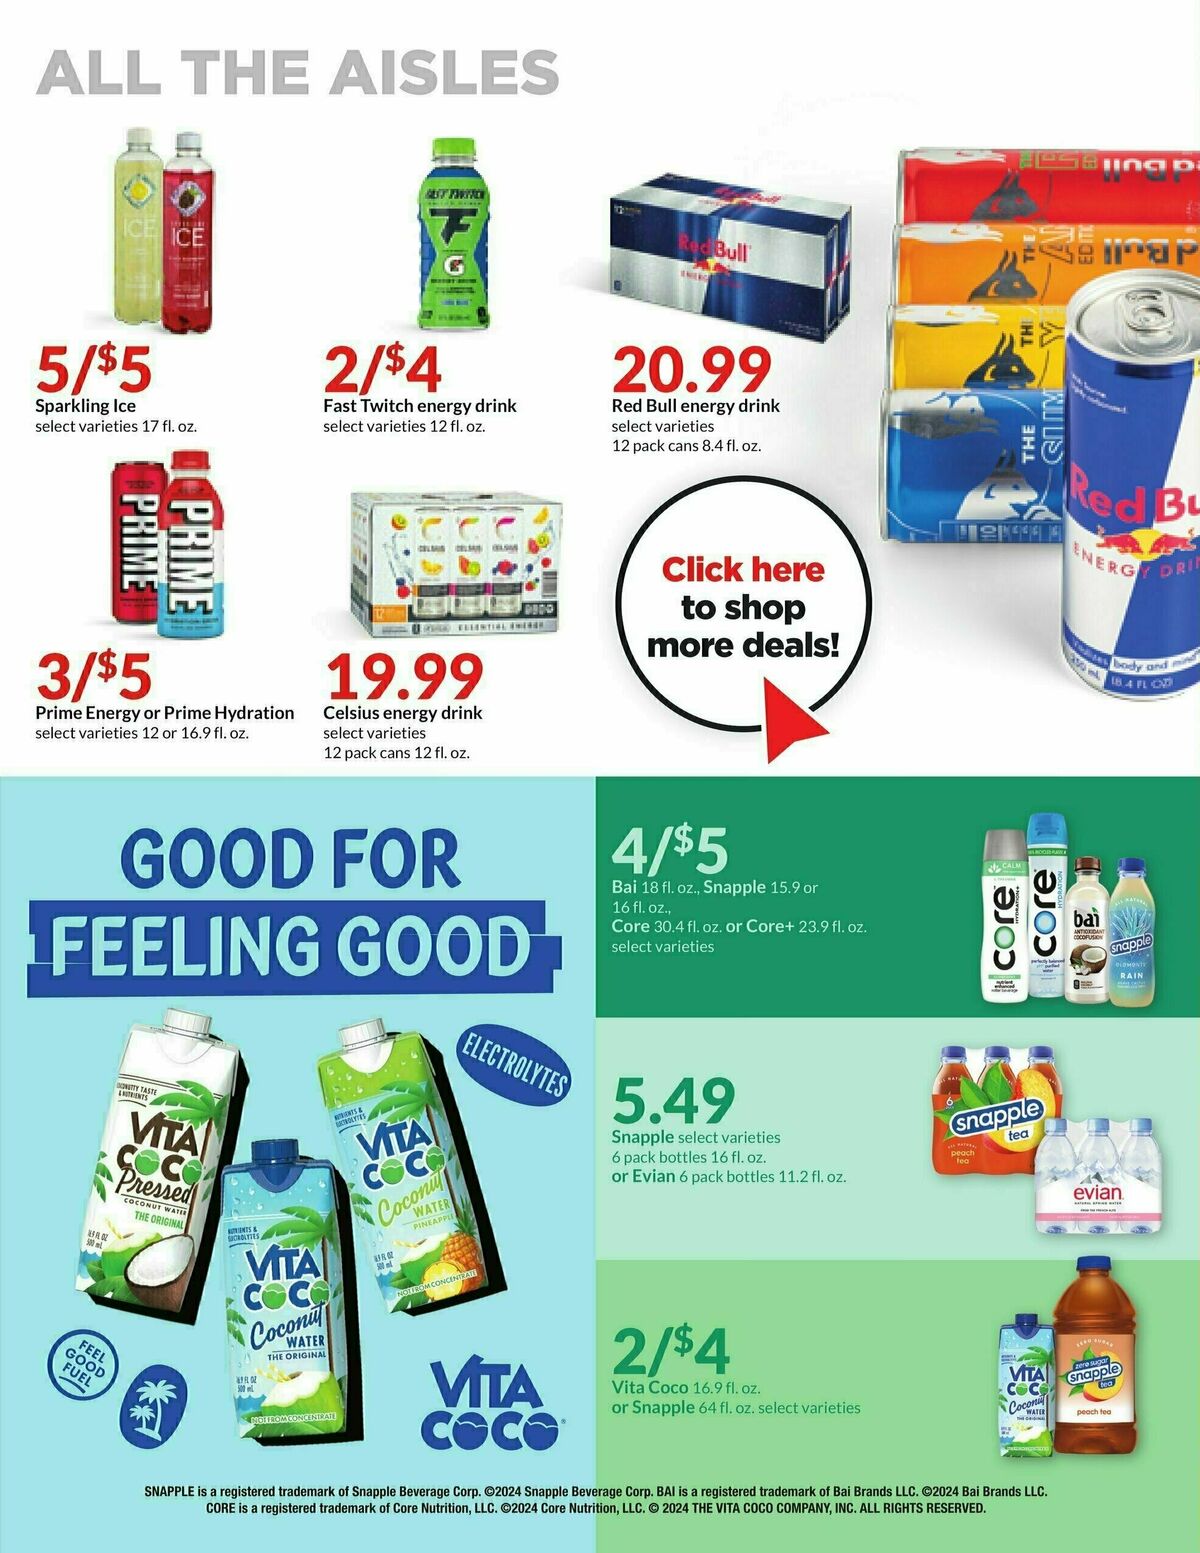 Hy-Vee January Monthly Deals Weekly Ad from January 1